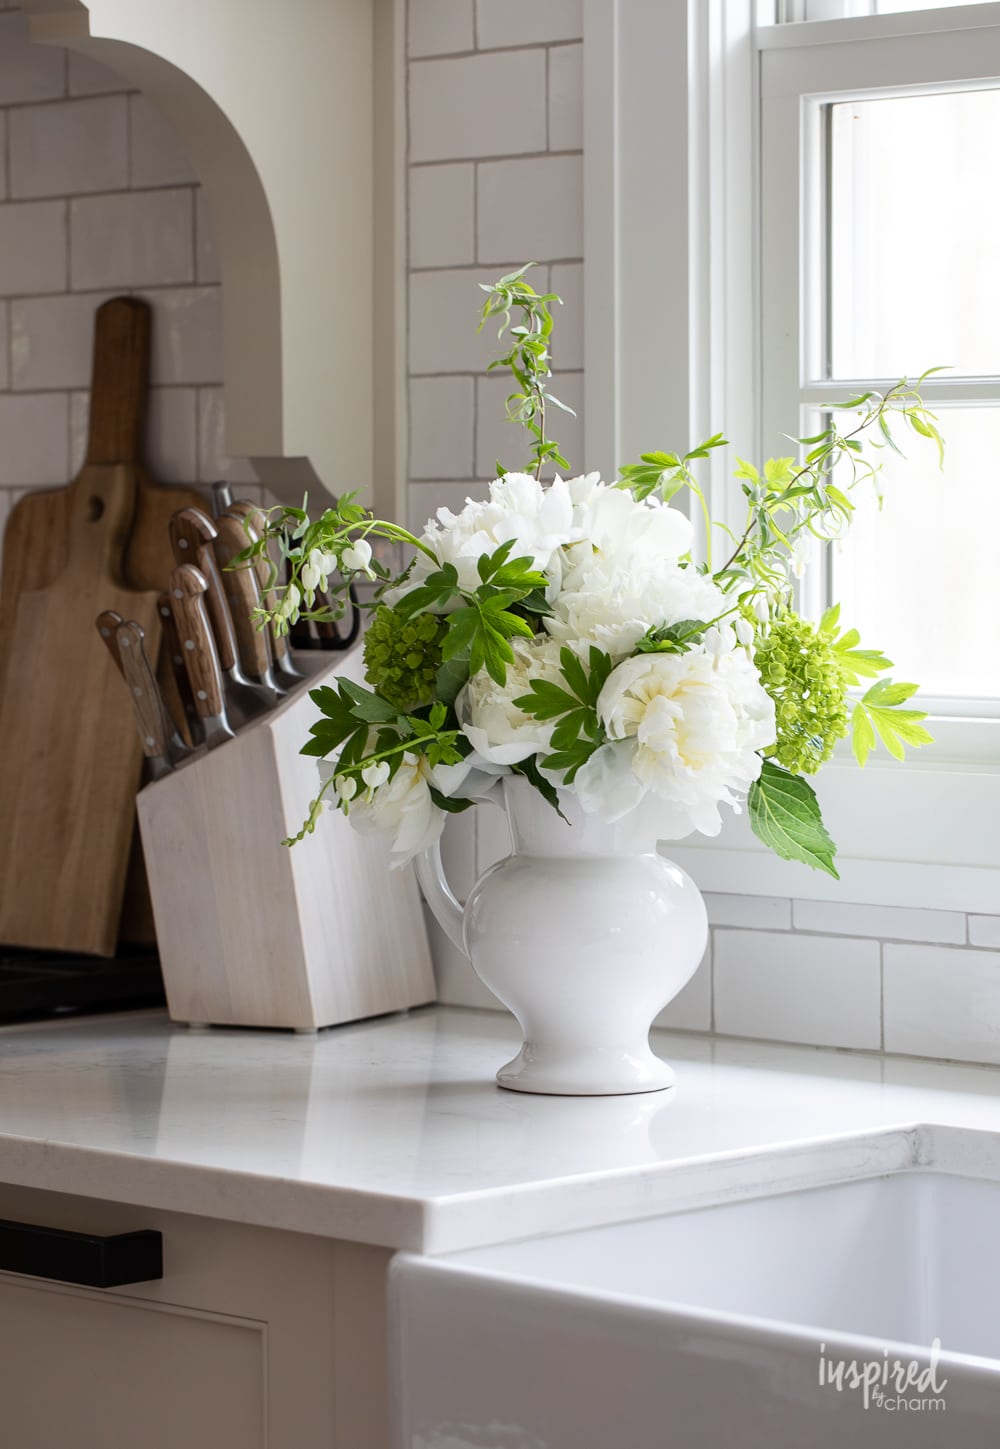 peony arrangement in a white vase on a countertop.